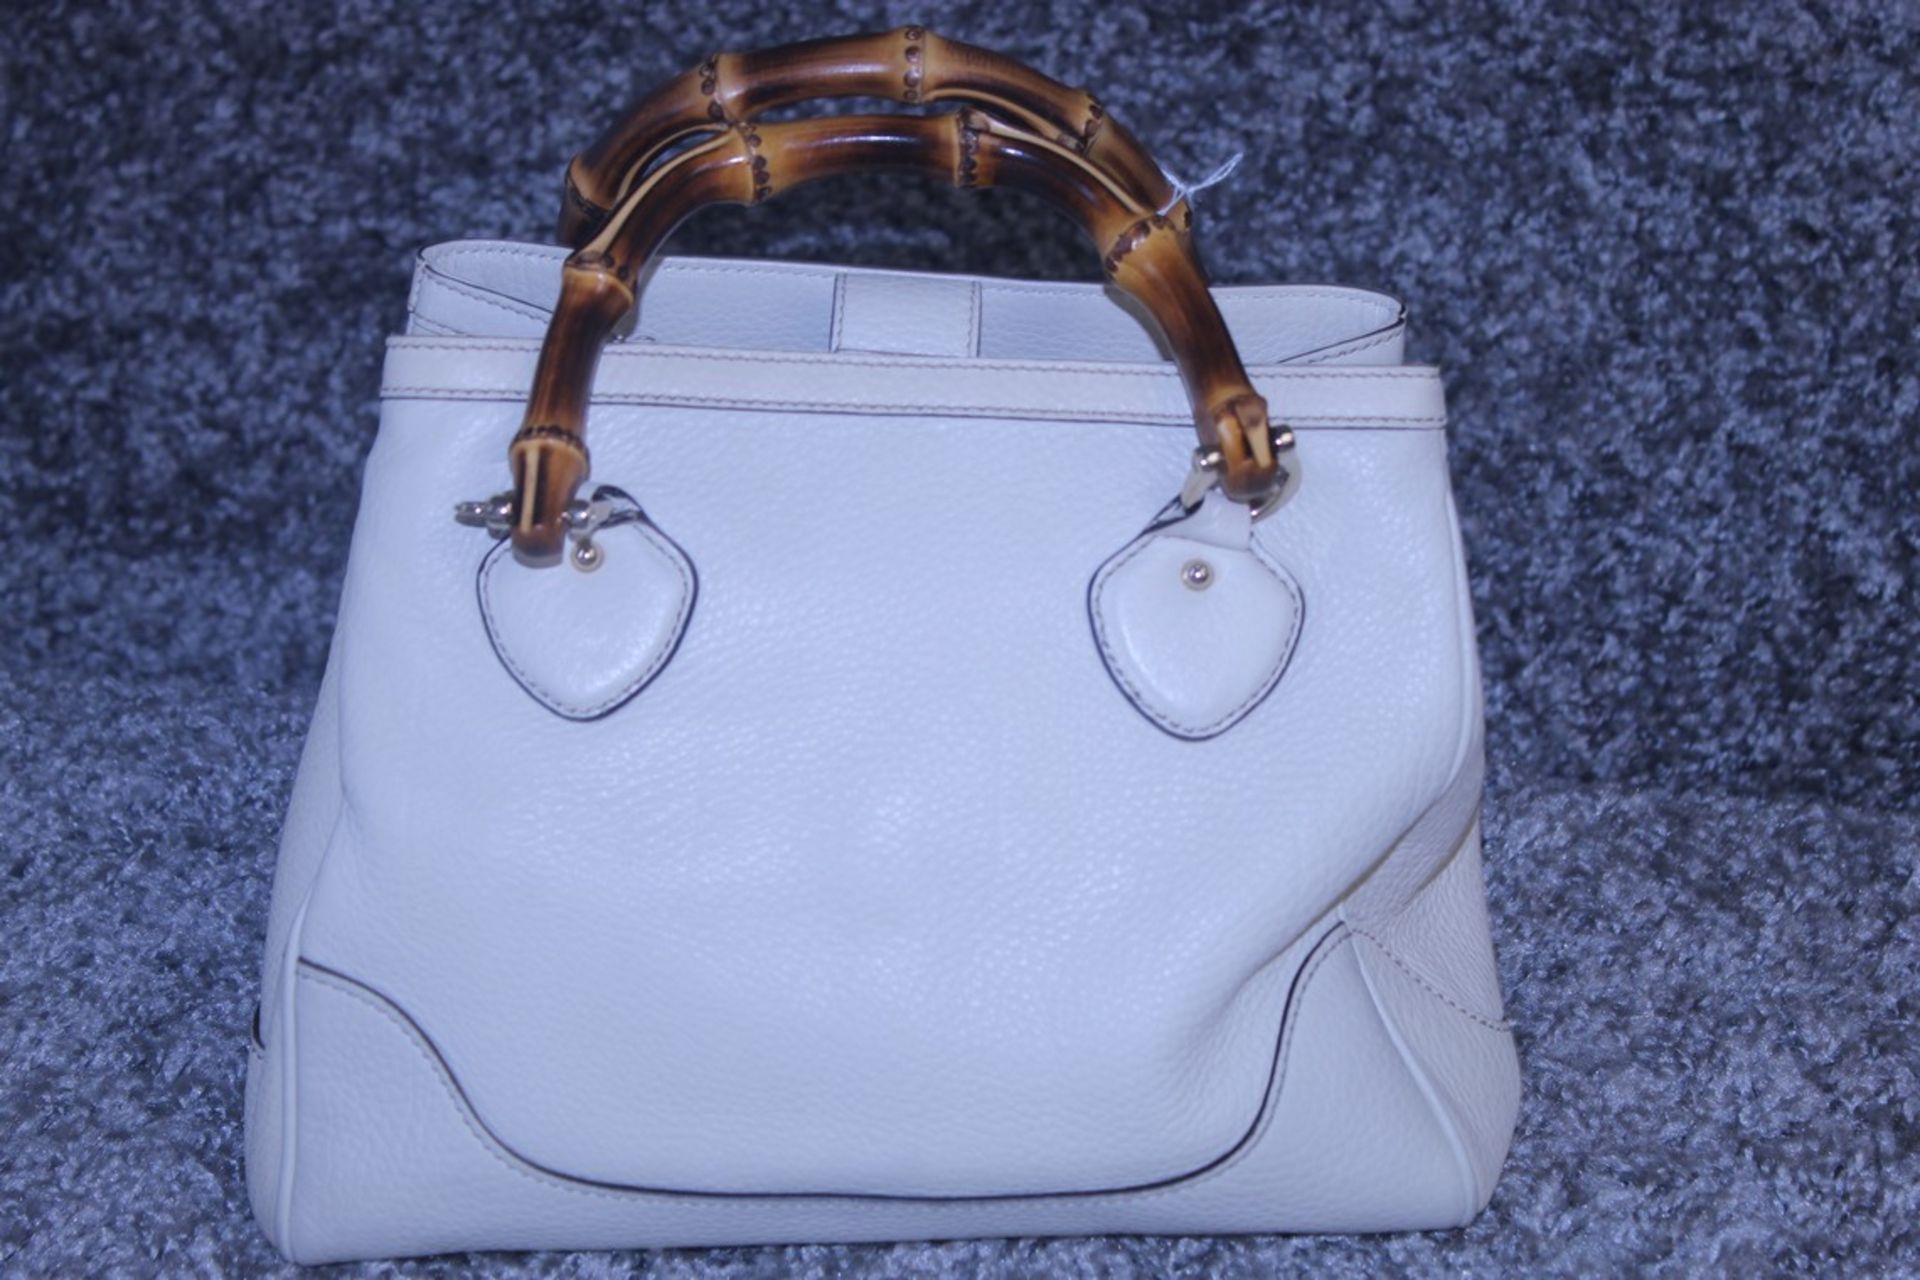 Rrp £1250 Gucci Calf Leather/Grained Leather Bamboo Tote Luxury Womens Ivory Handbag With Gold